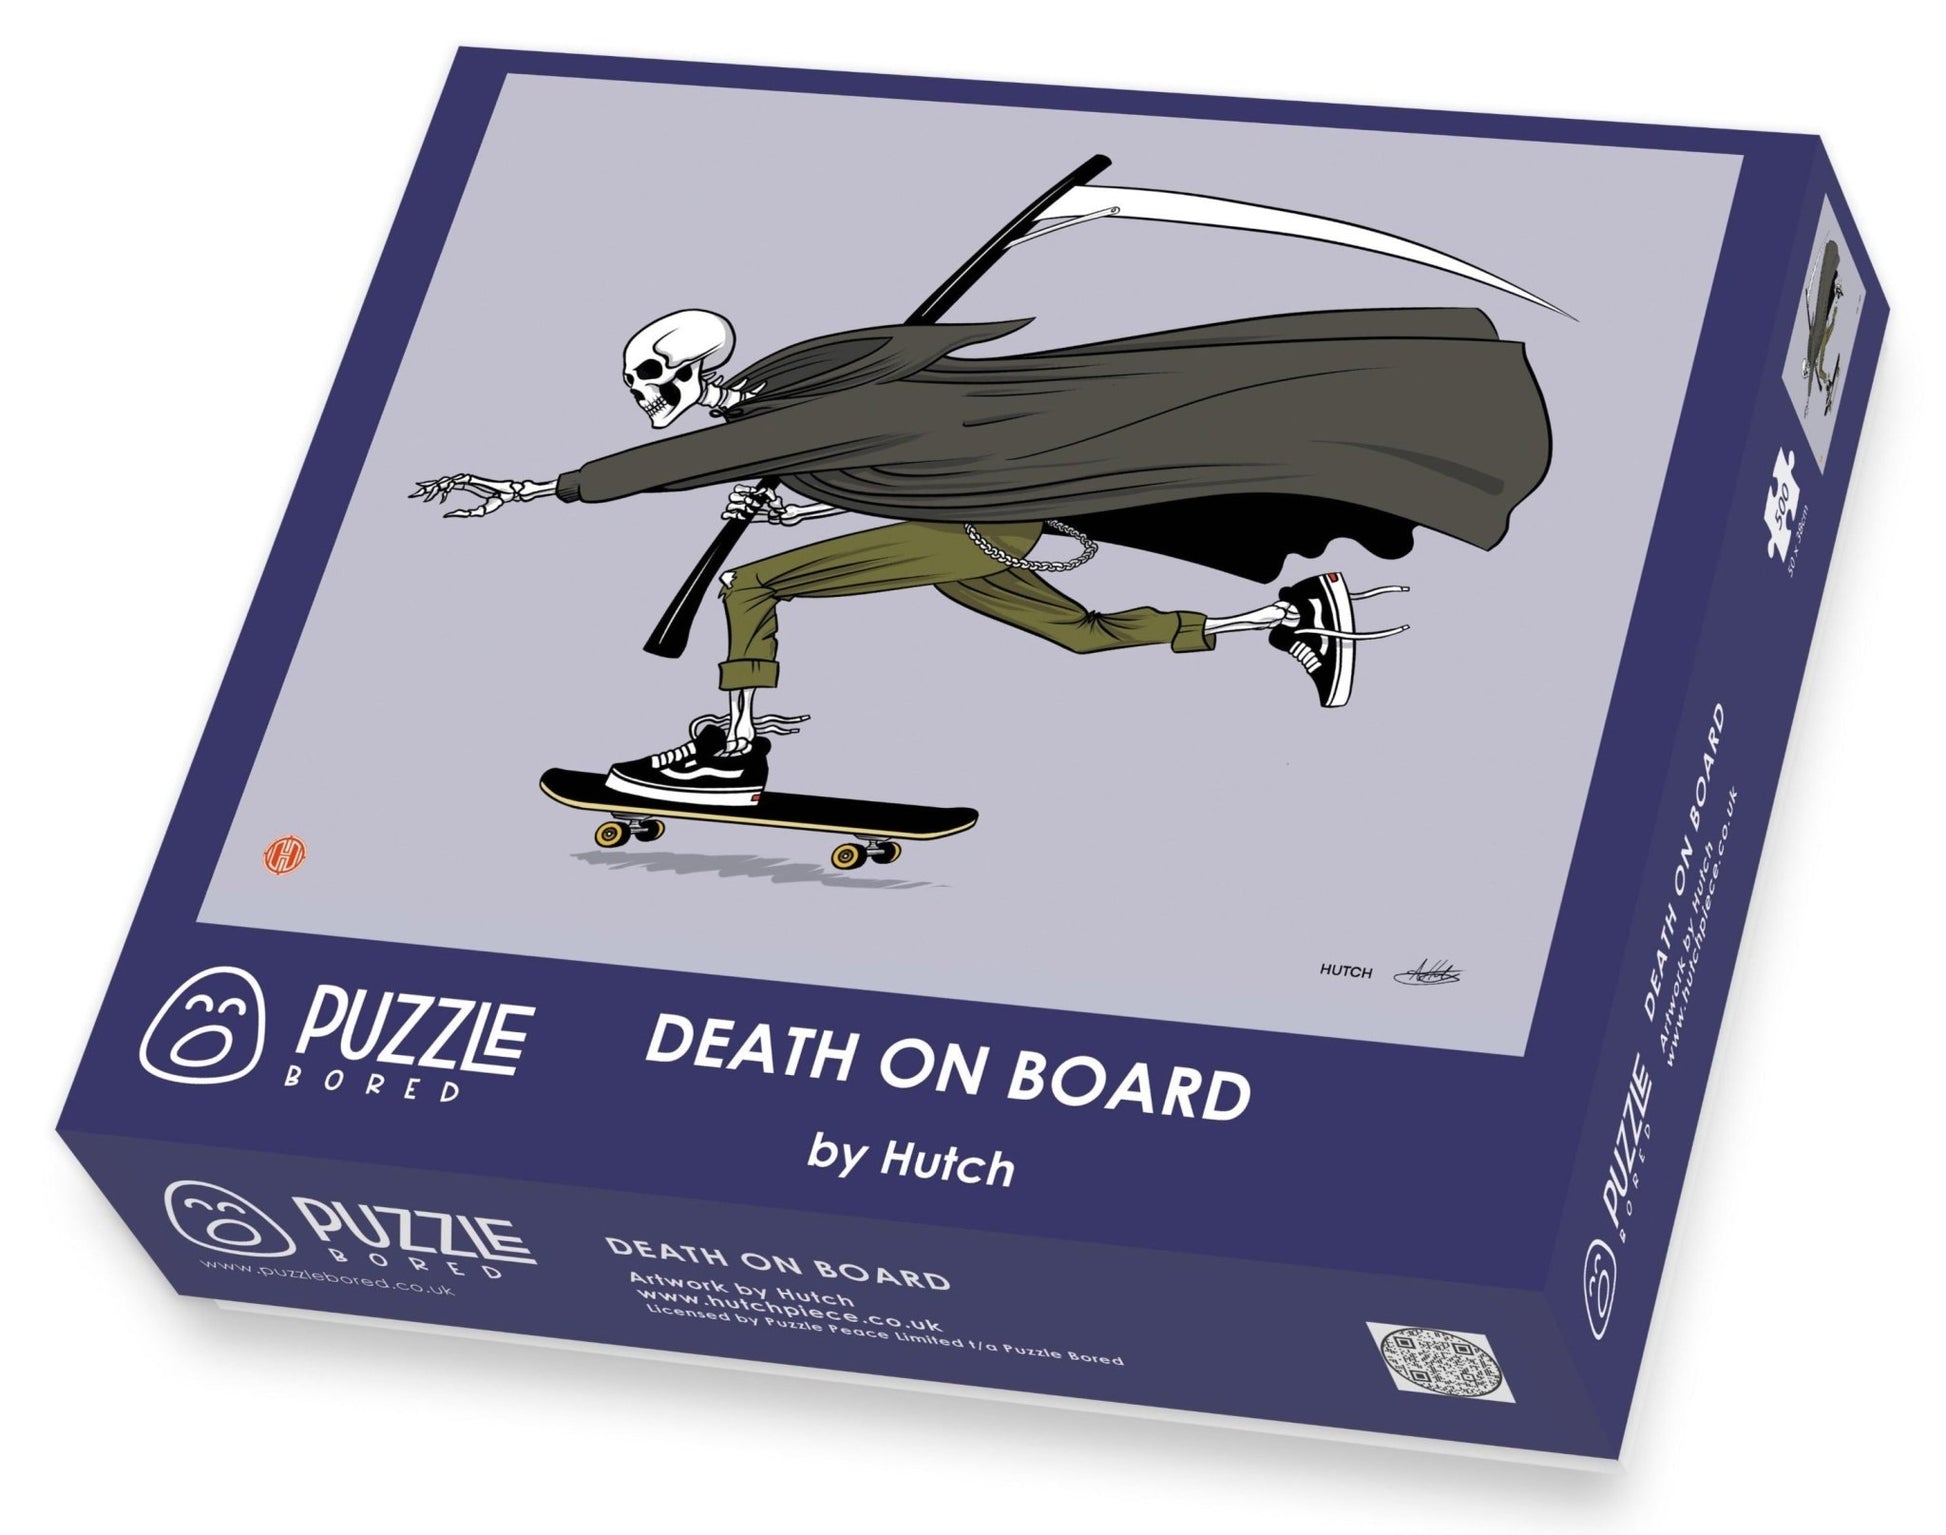 Death on Board by Hutch - Puzzle Bored